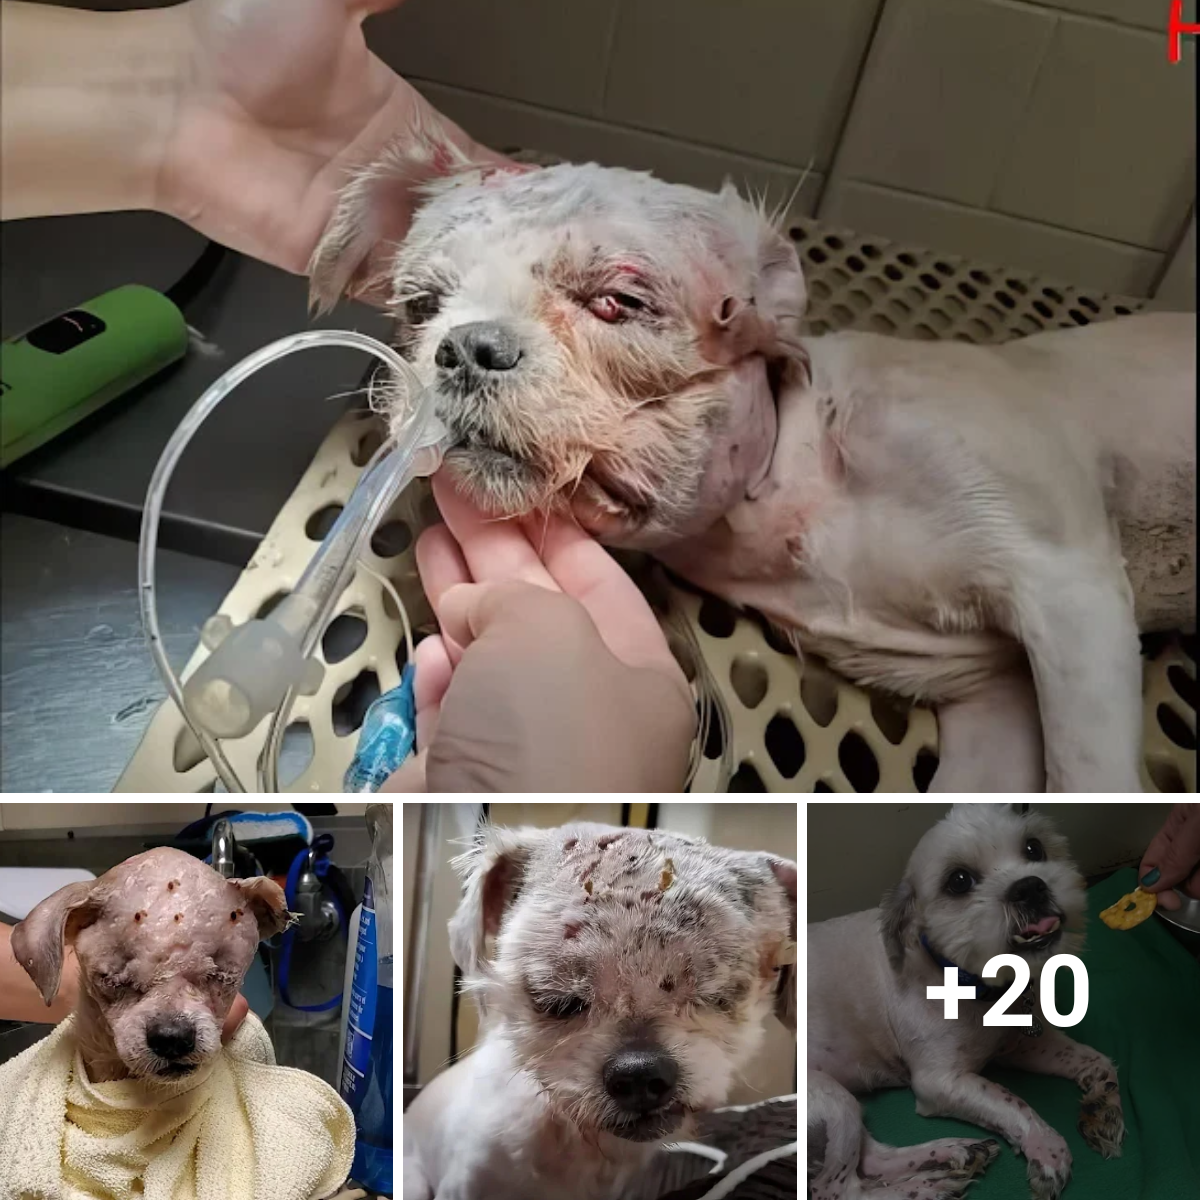 Finally, luck came and the dog was saved from a critical condition. Let’s wish him a speedy recovery and comfort him in his pain